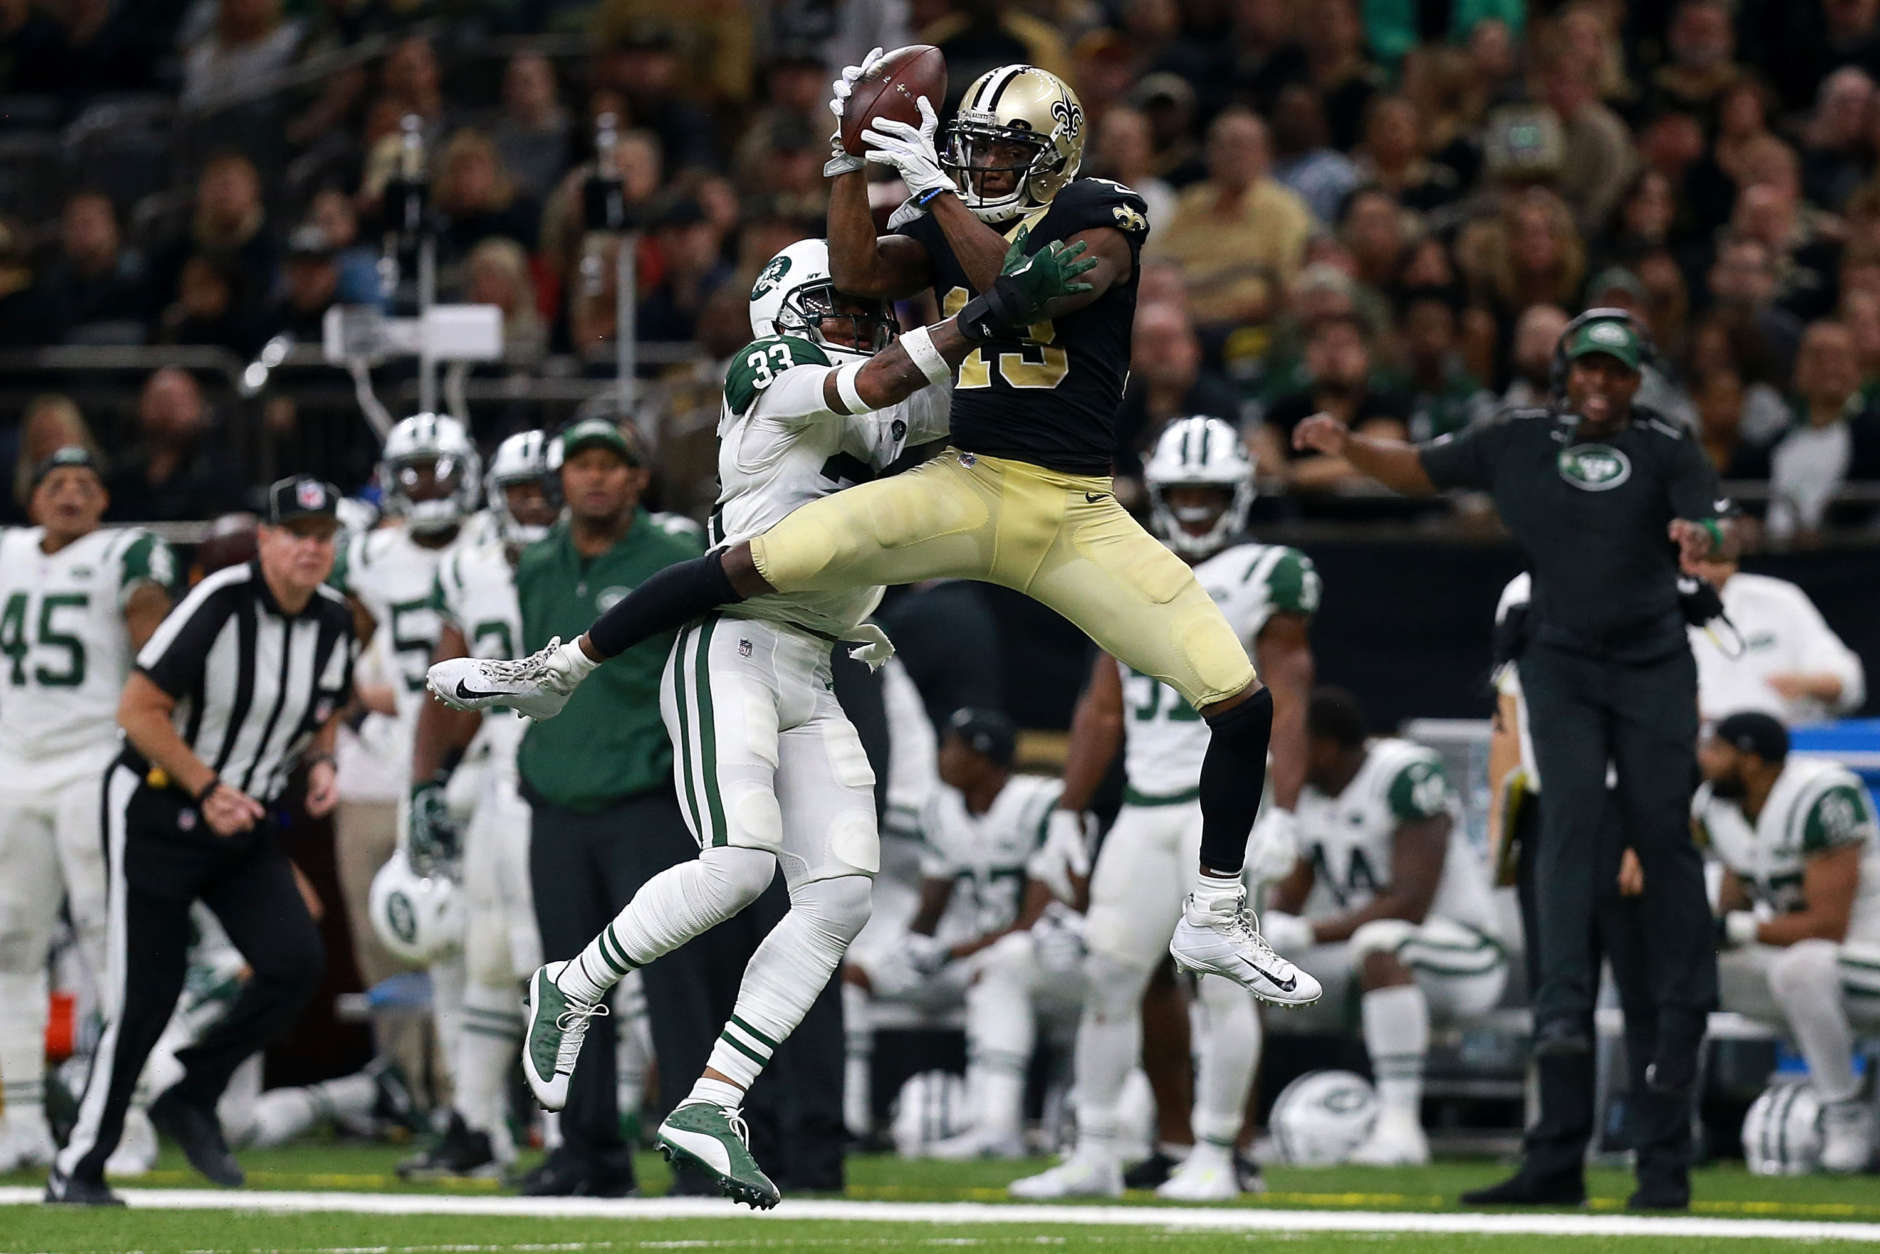 NEW ORLEANS, LA - DECEMBER 17:  Wide receiver Michael Thomas #13 of the New Orleans Saints catches the ball over strong safety Jamal Adams #33 of the New York Jets during the second half of a game at the Mercedes-Benz Superdome on December 17, 2017 in New Orleans, Louisiana.  (Photo by Sean Gardner/Getty Images)